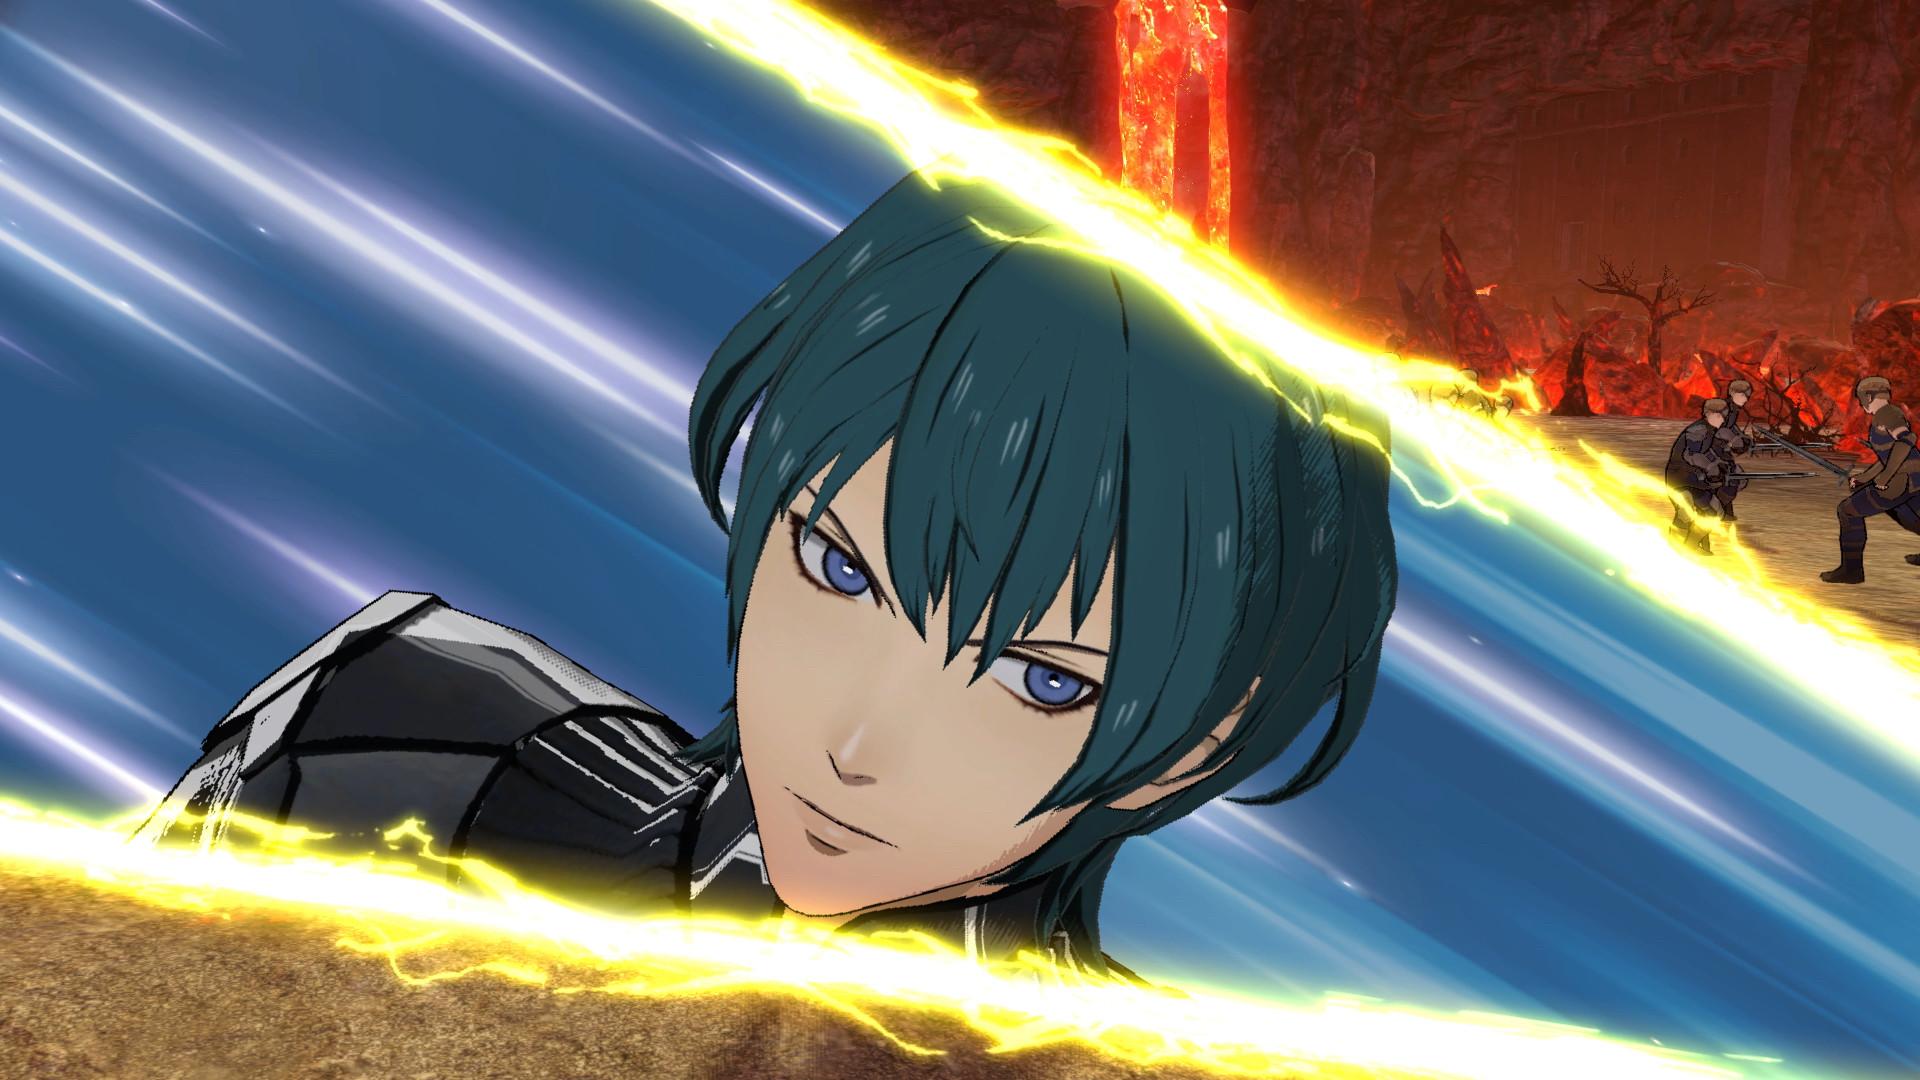 Fire Emblem: Three Houses review - another peak for a franchise